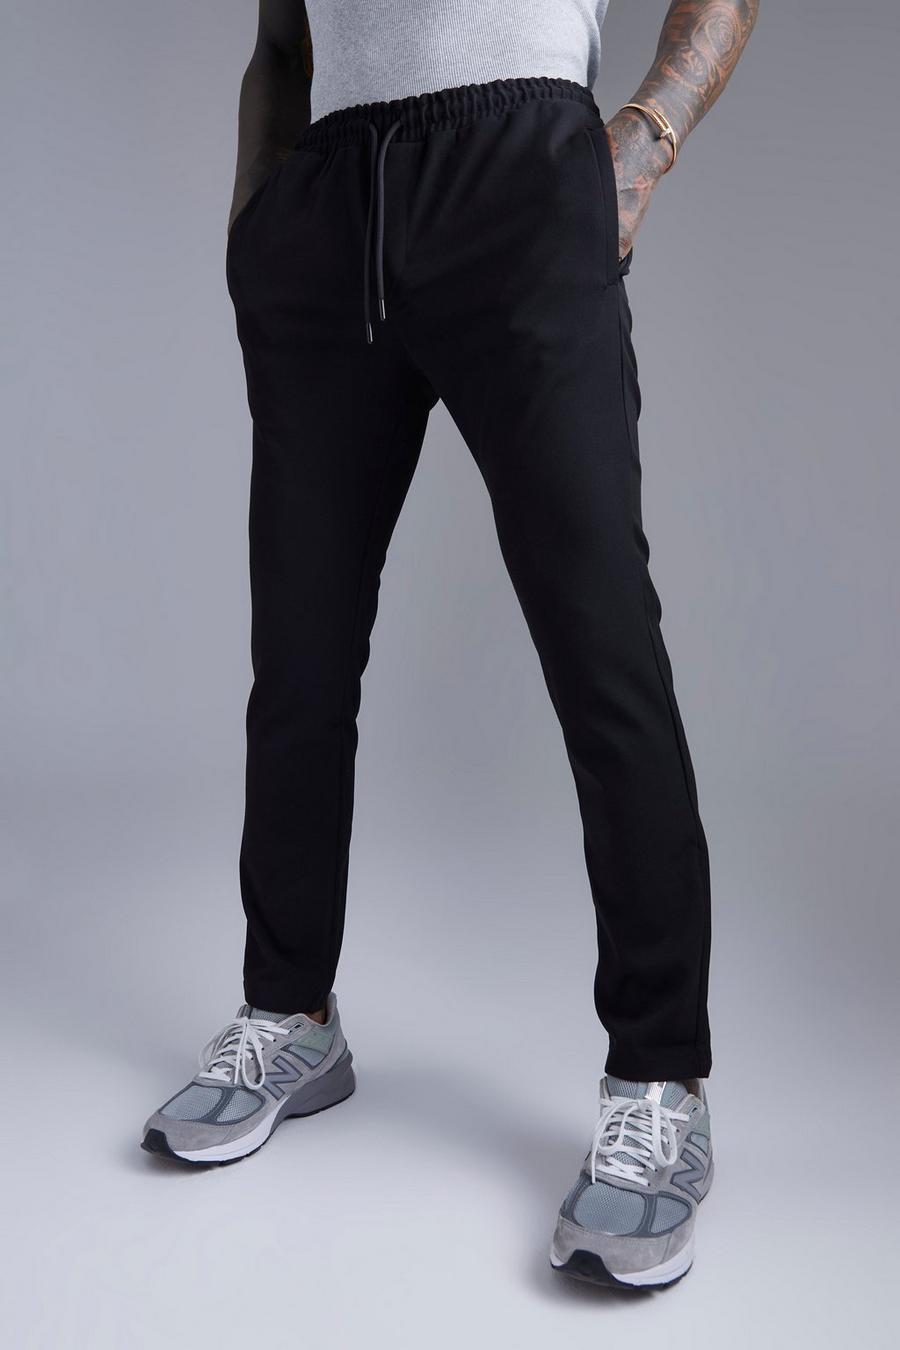 Black Tapered Comfort Stretch Jogger Waist Trousers